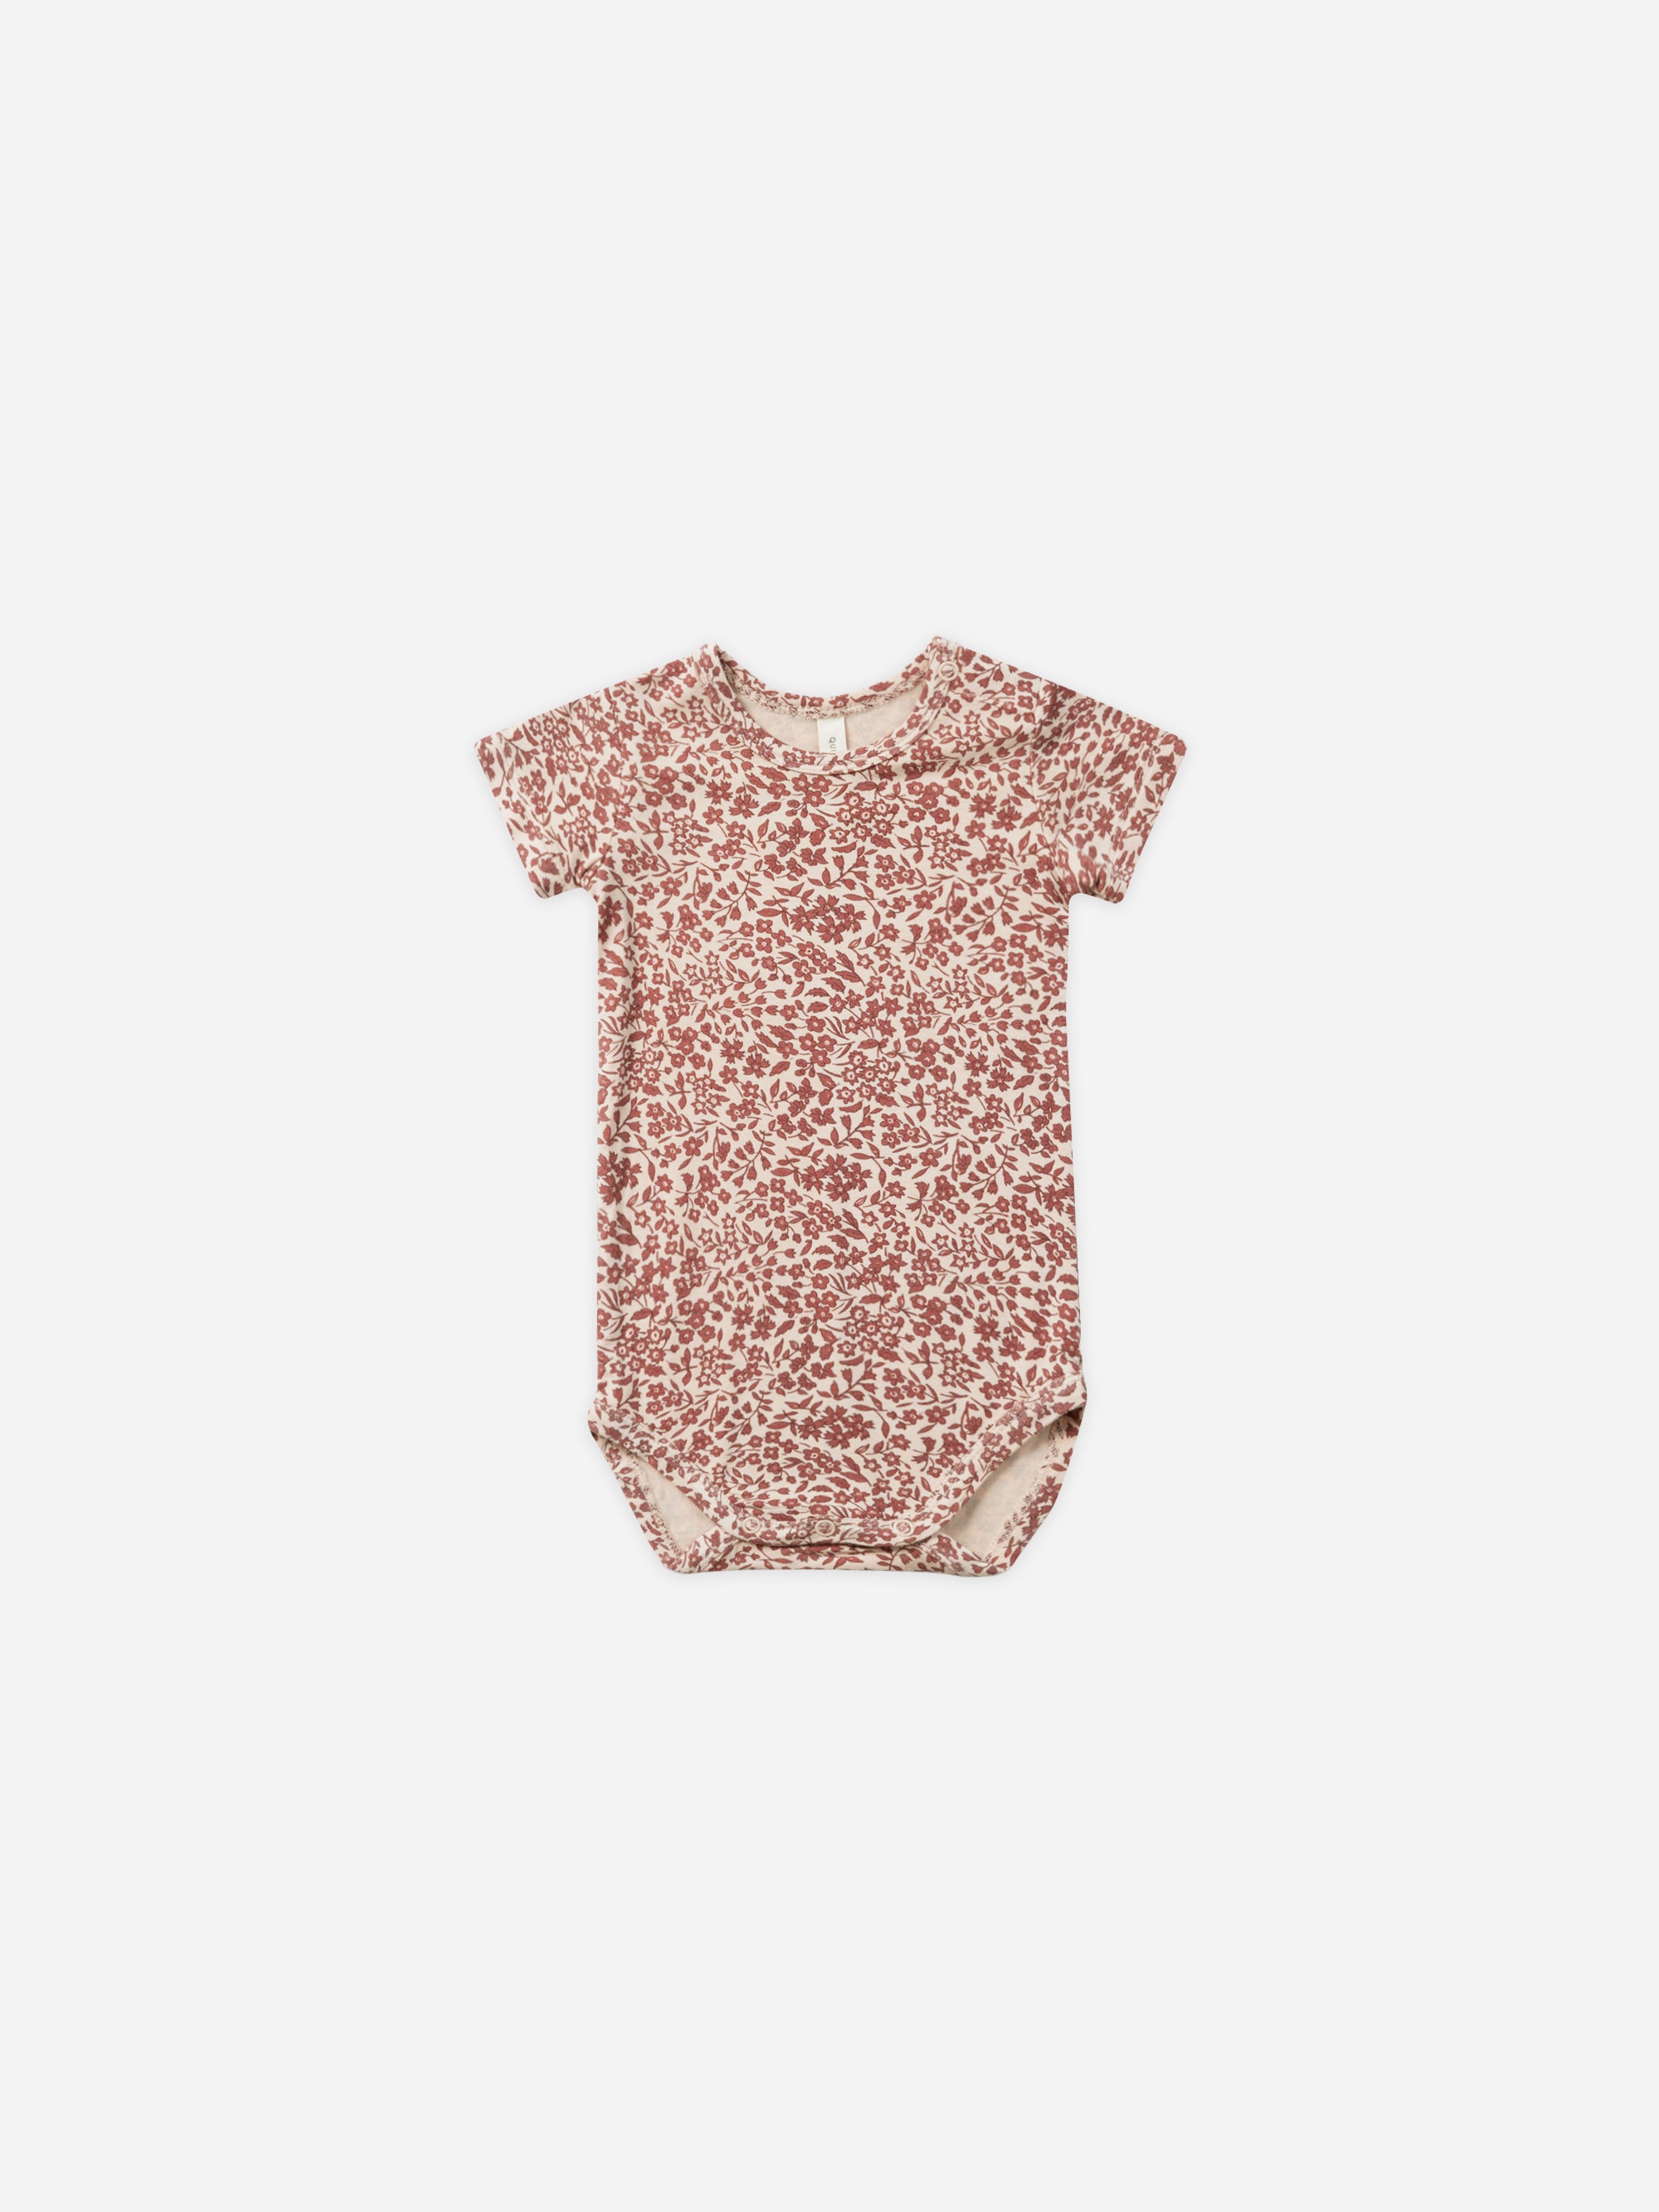 Bamboo Short Sleeve Bodysuit || Flower Field - Rylee + Cru | Kids Clothes | Trendy Baby Clothes | Modern Infant Outfits |